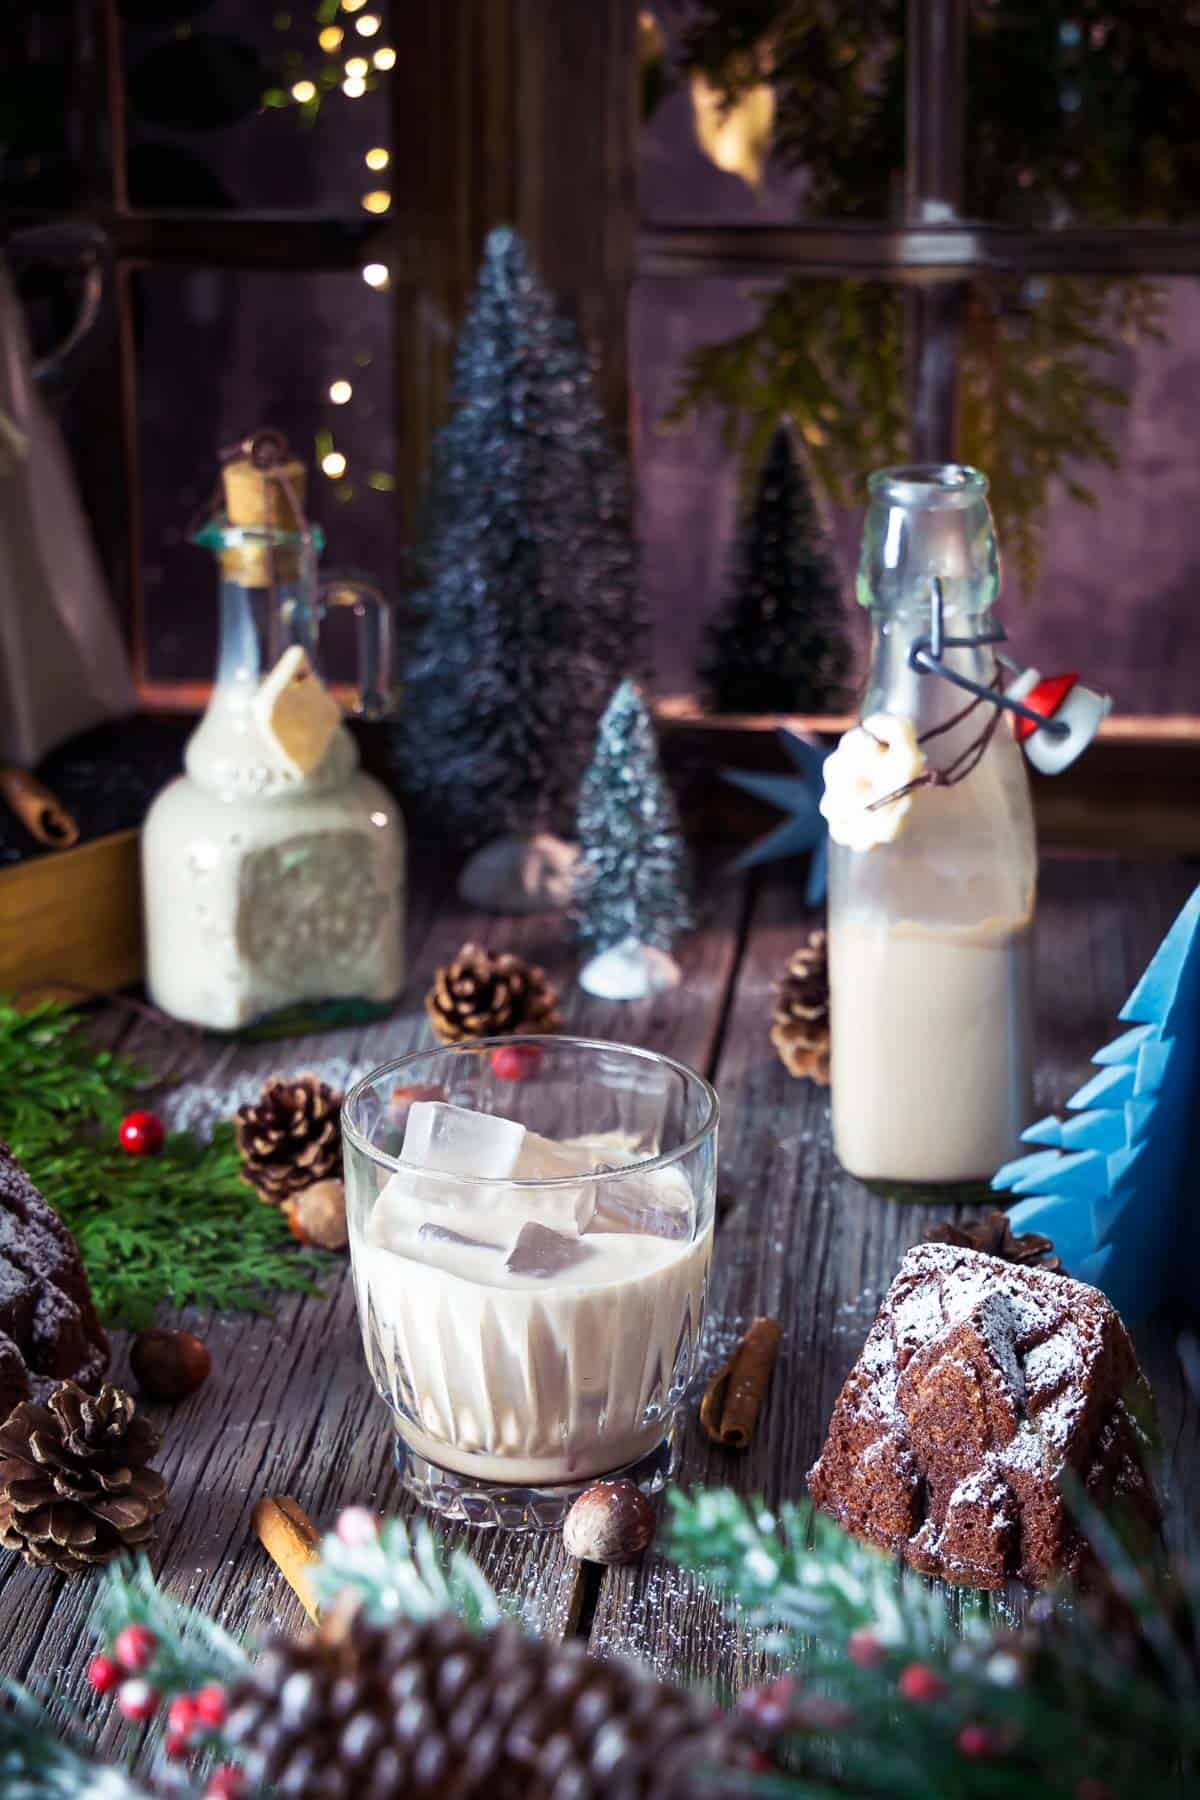 Homemade Christmas Baileys in pretty bottles and a glass on a festive-decorated table.